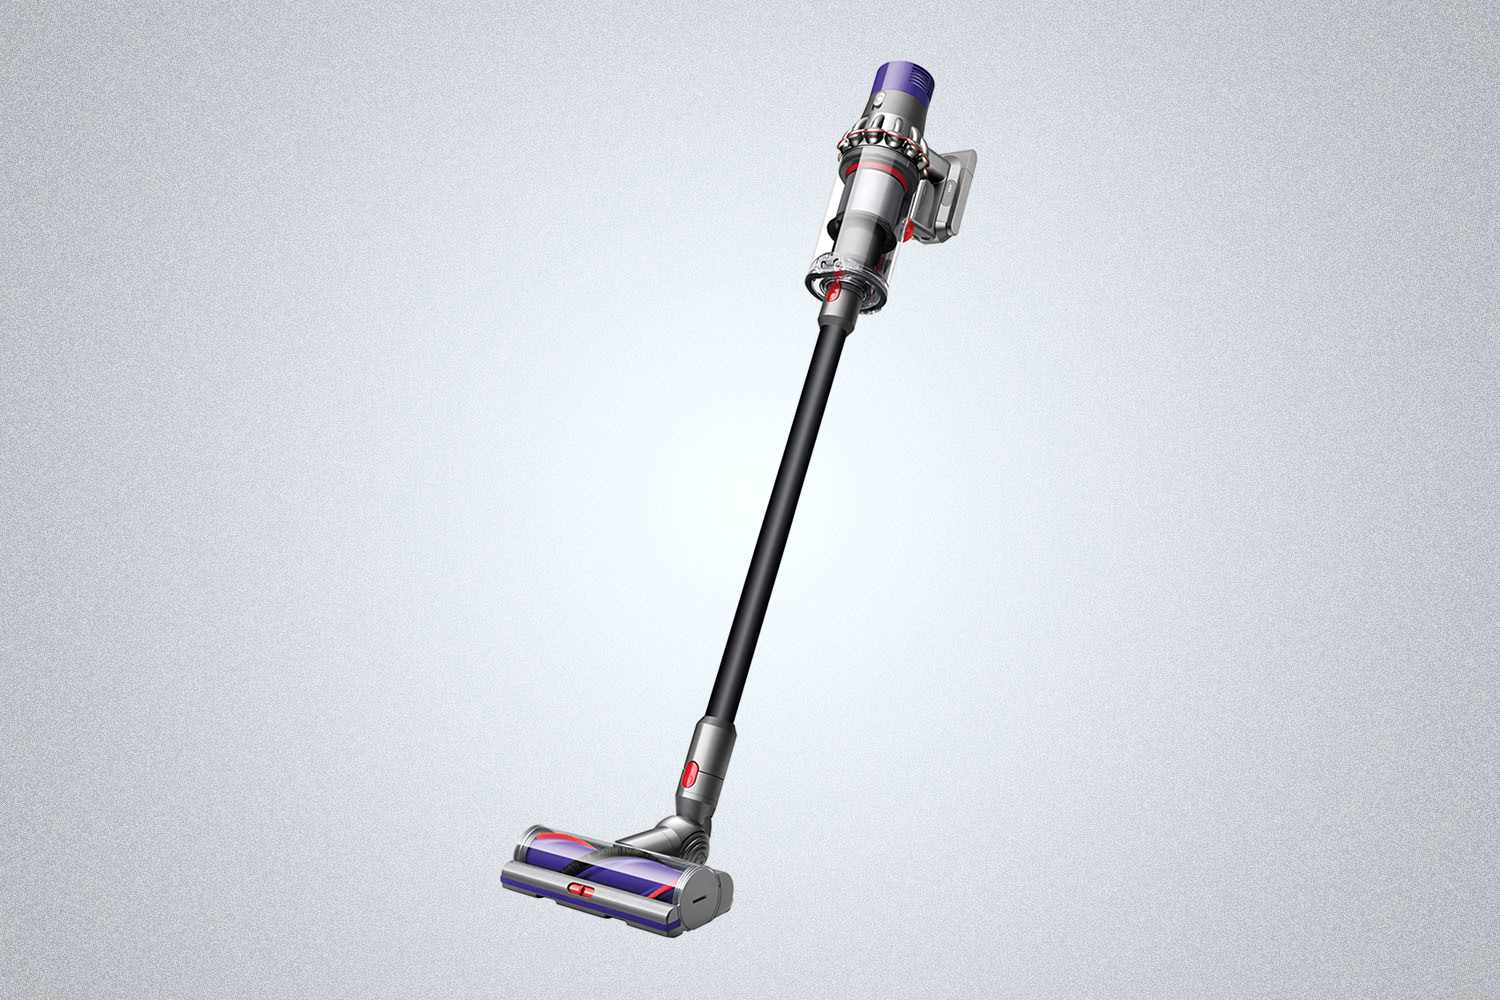 The Dyson Cyclone V10 Absolute cordless vacuum on a grey background